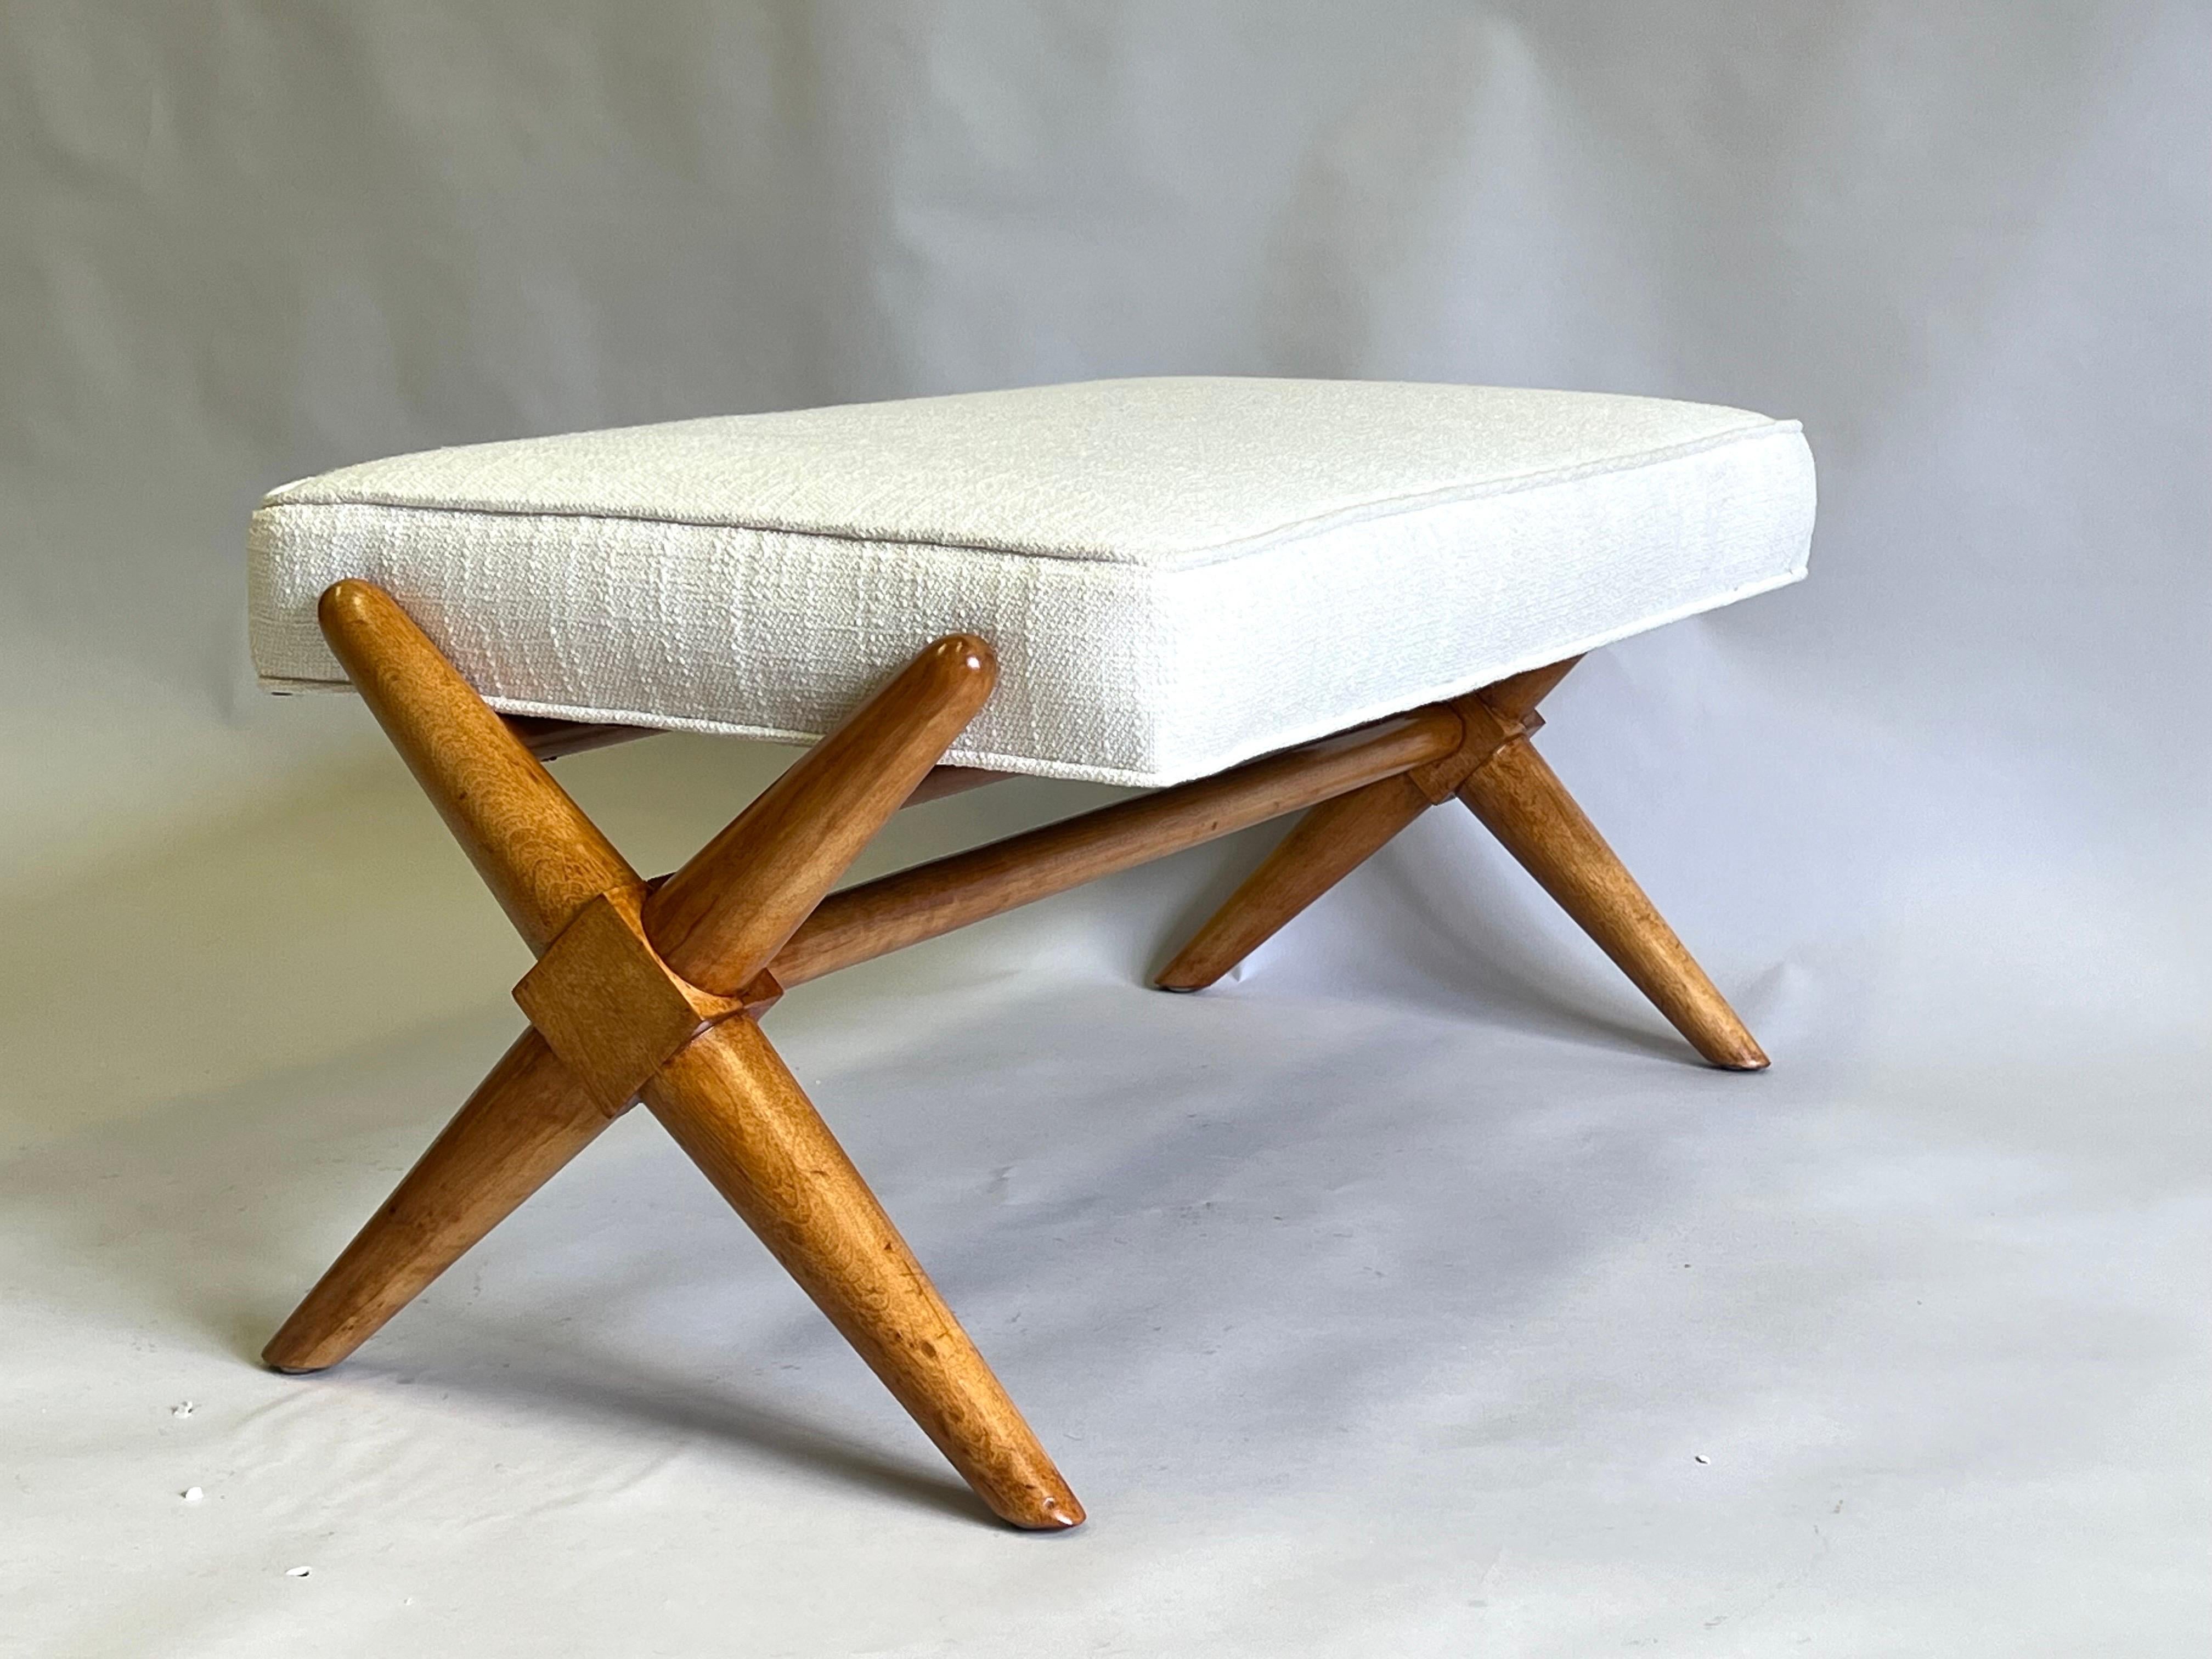 20th Century Mid-Century Modern Neoclassical Hardwood Bench in the style of Jean-Michel Frank